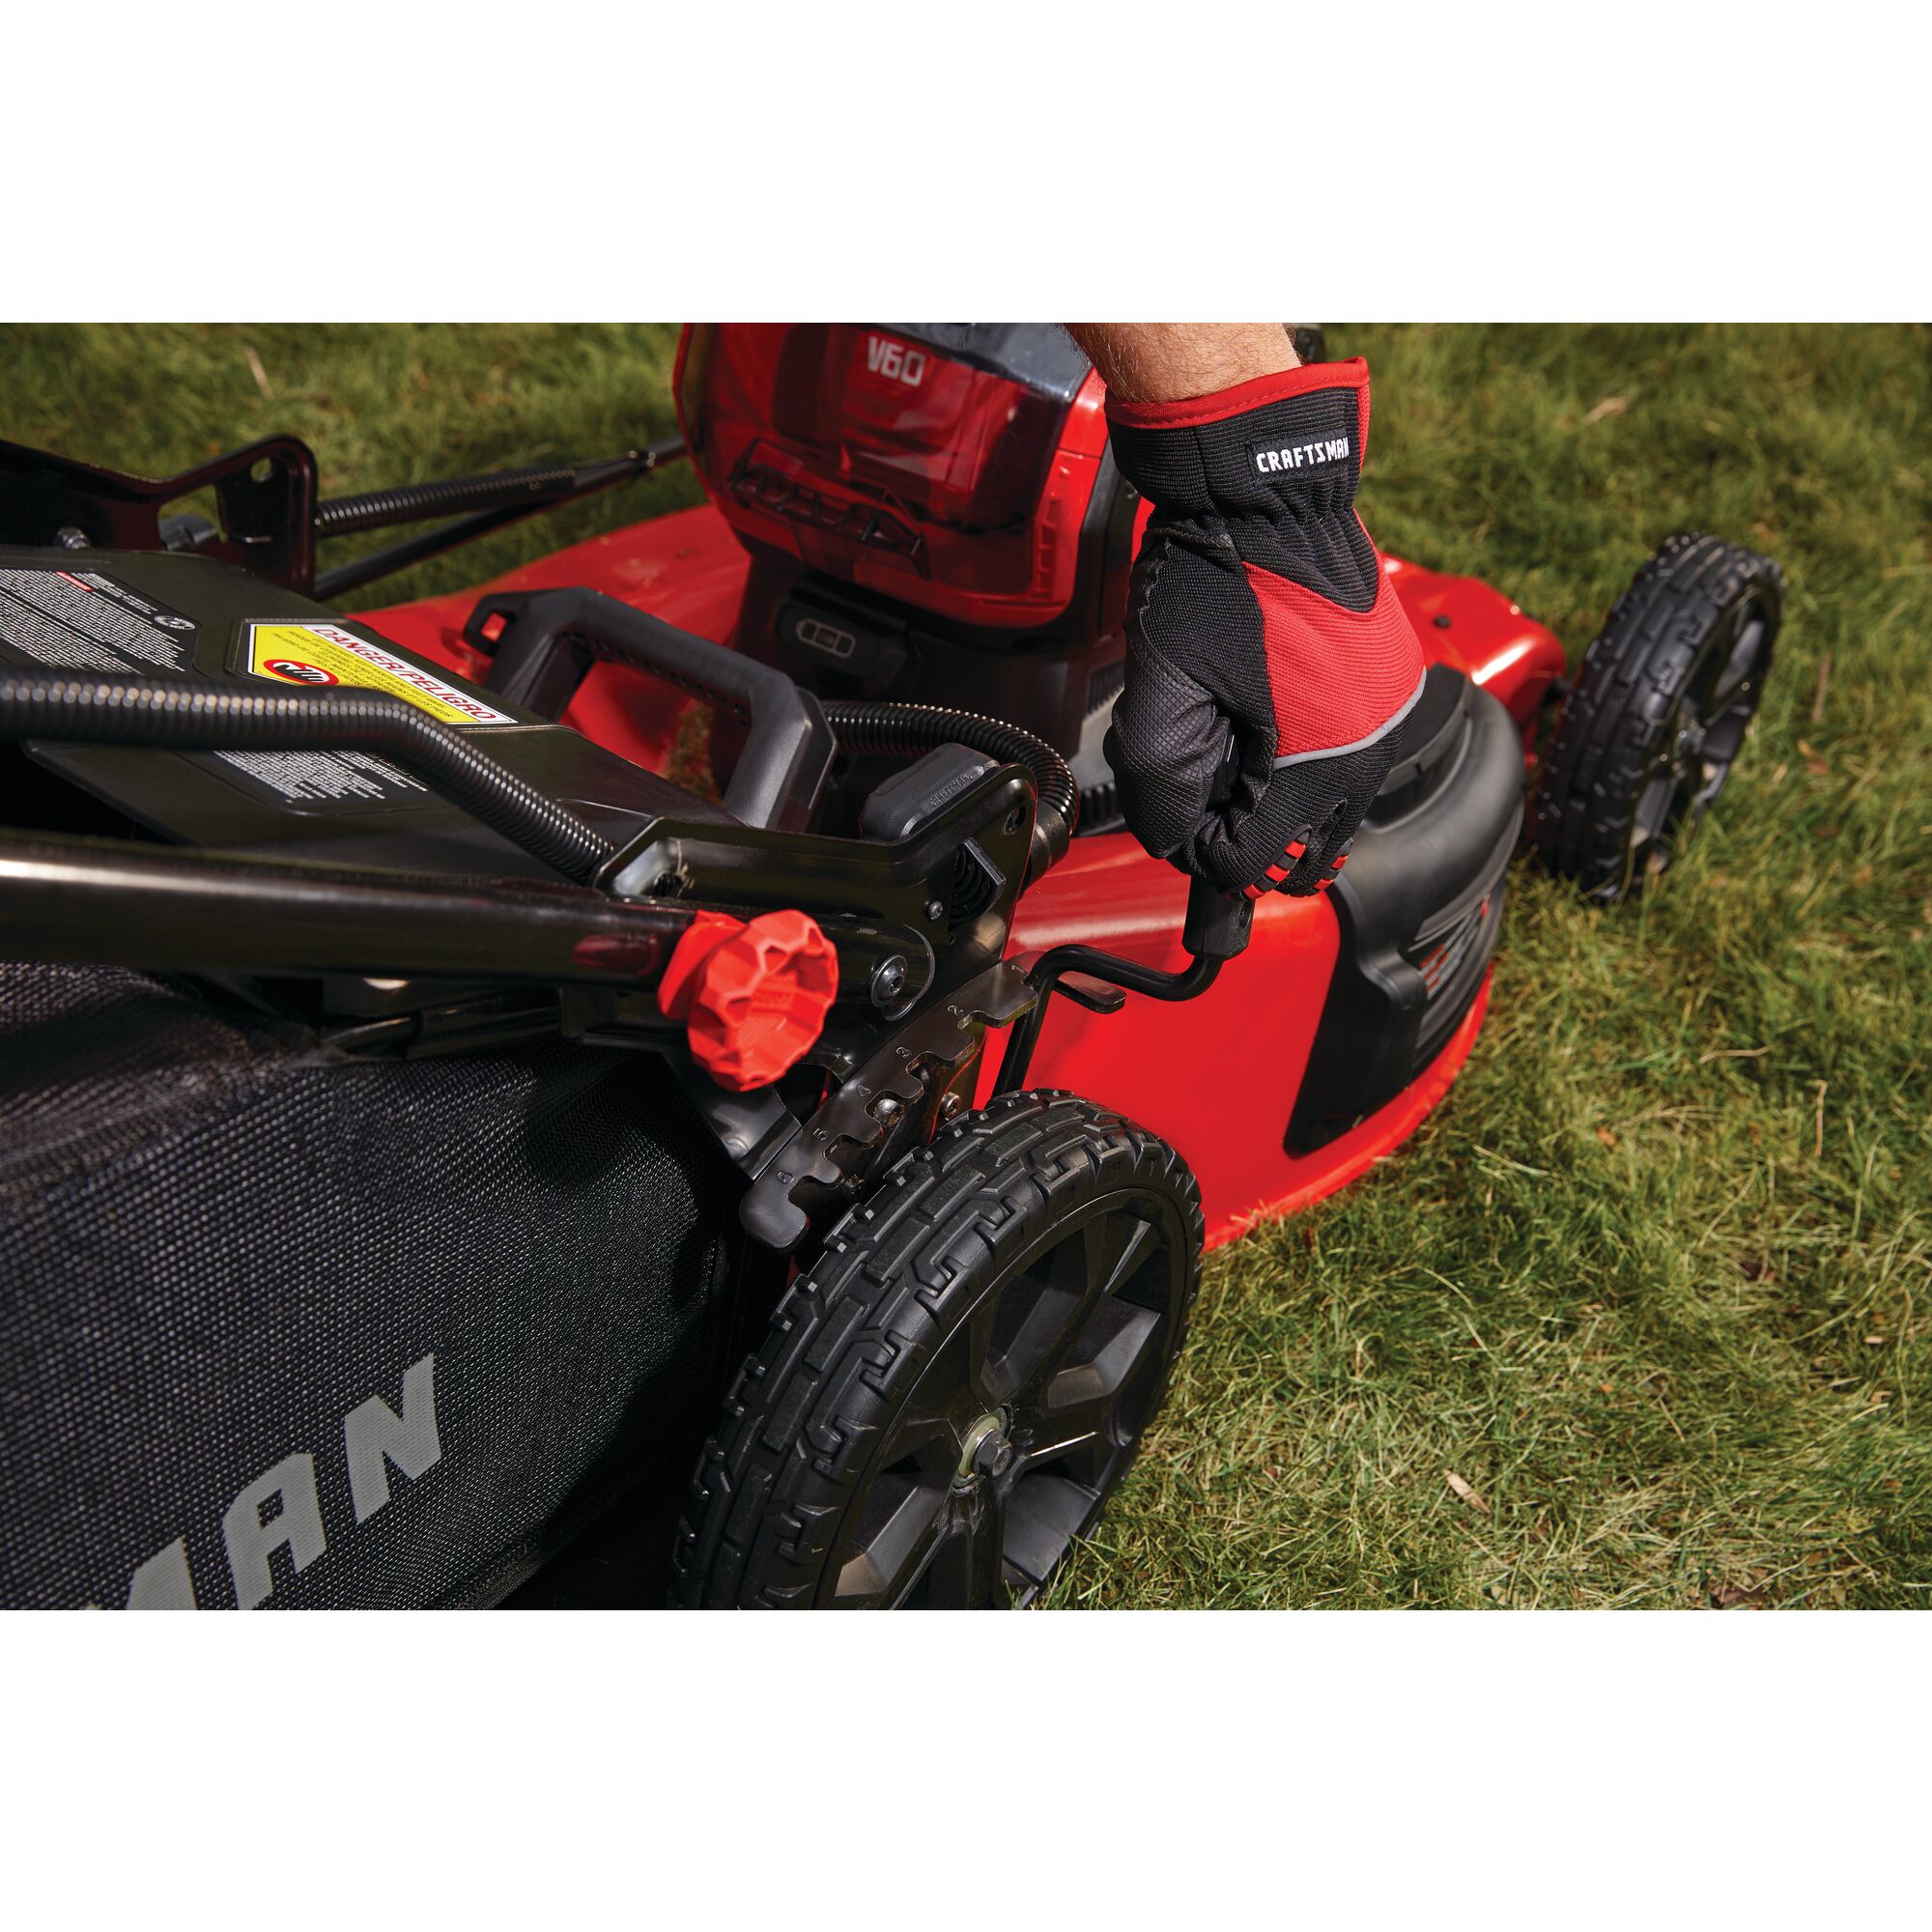 Single lever height adjustment feature of cordless 21 inch 3 in 1 lawn mower kit 5 amp hour.